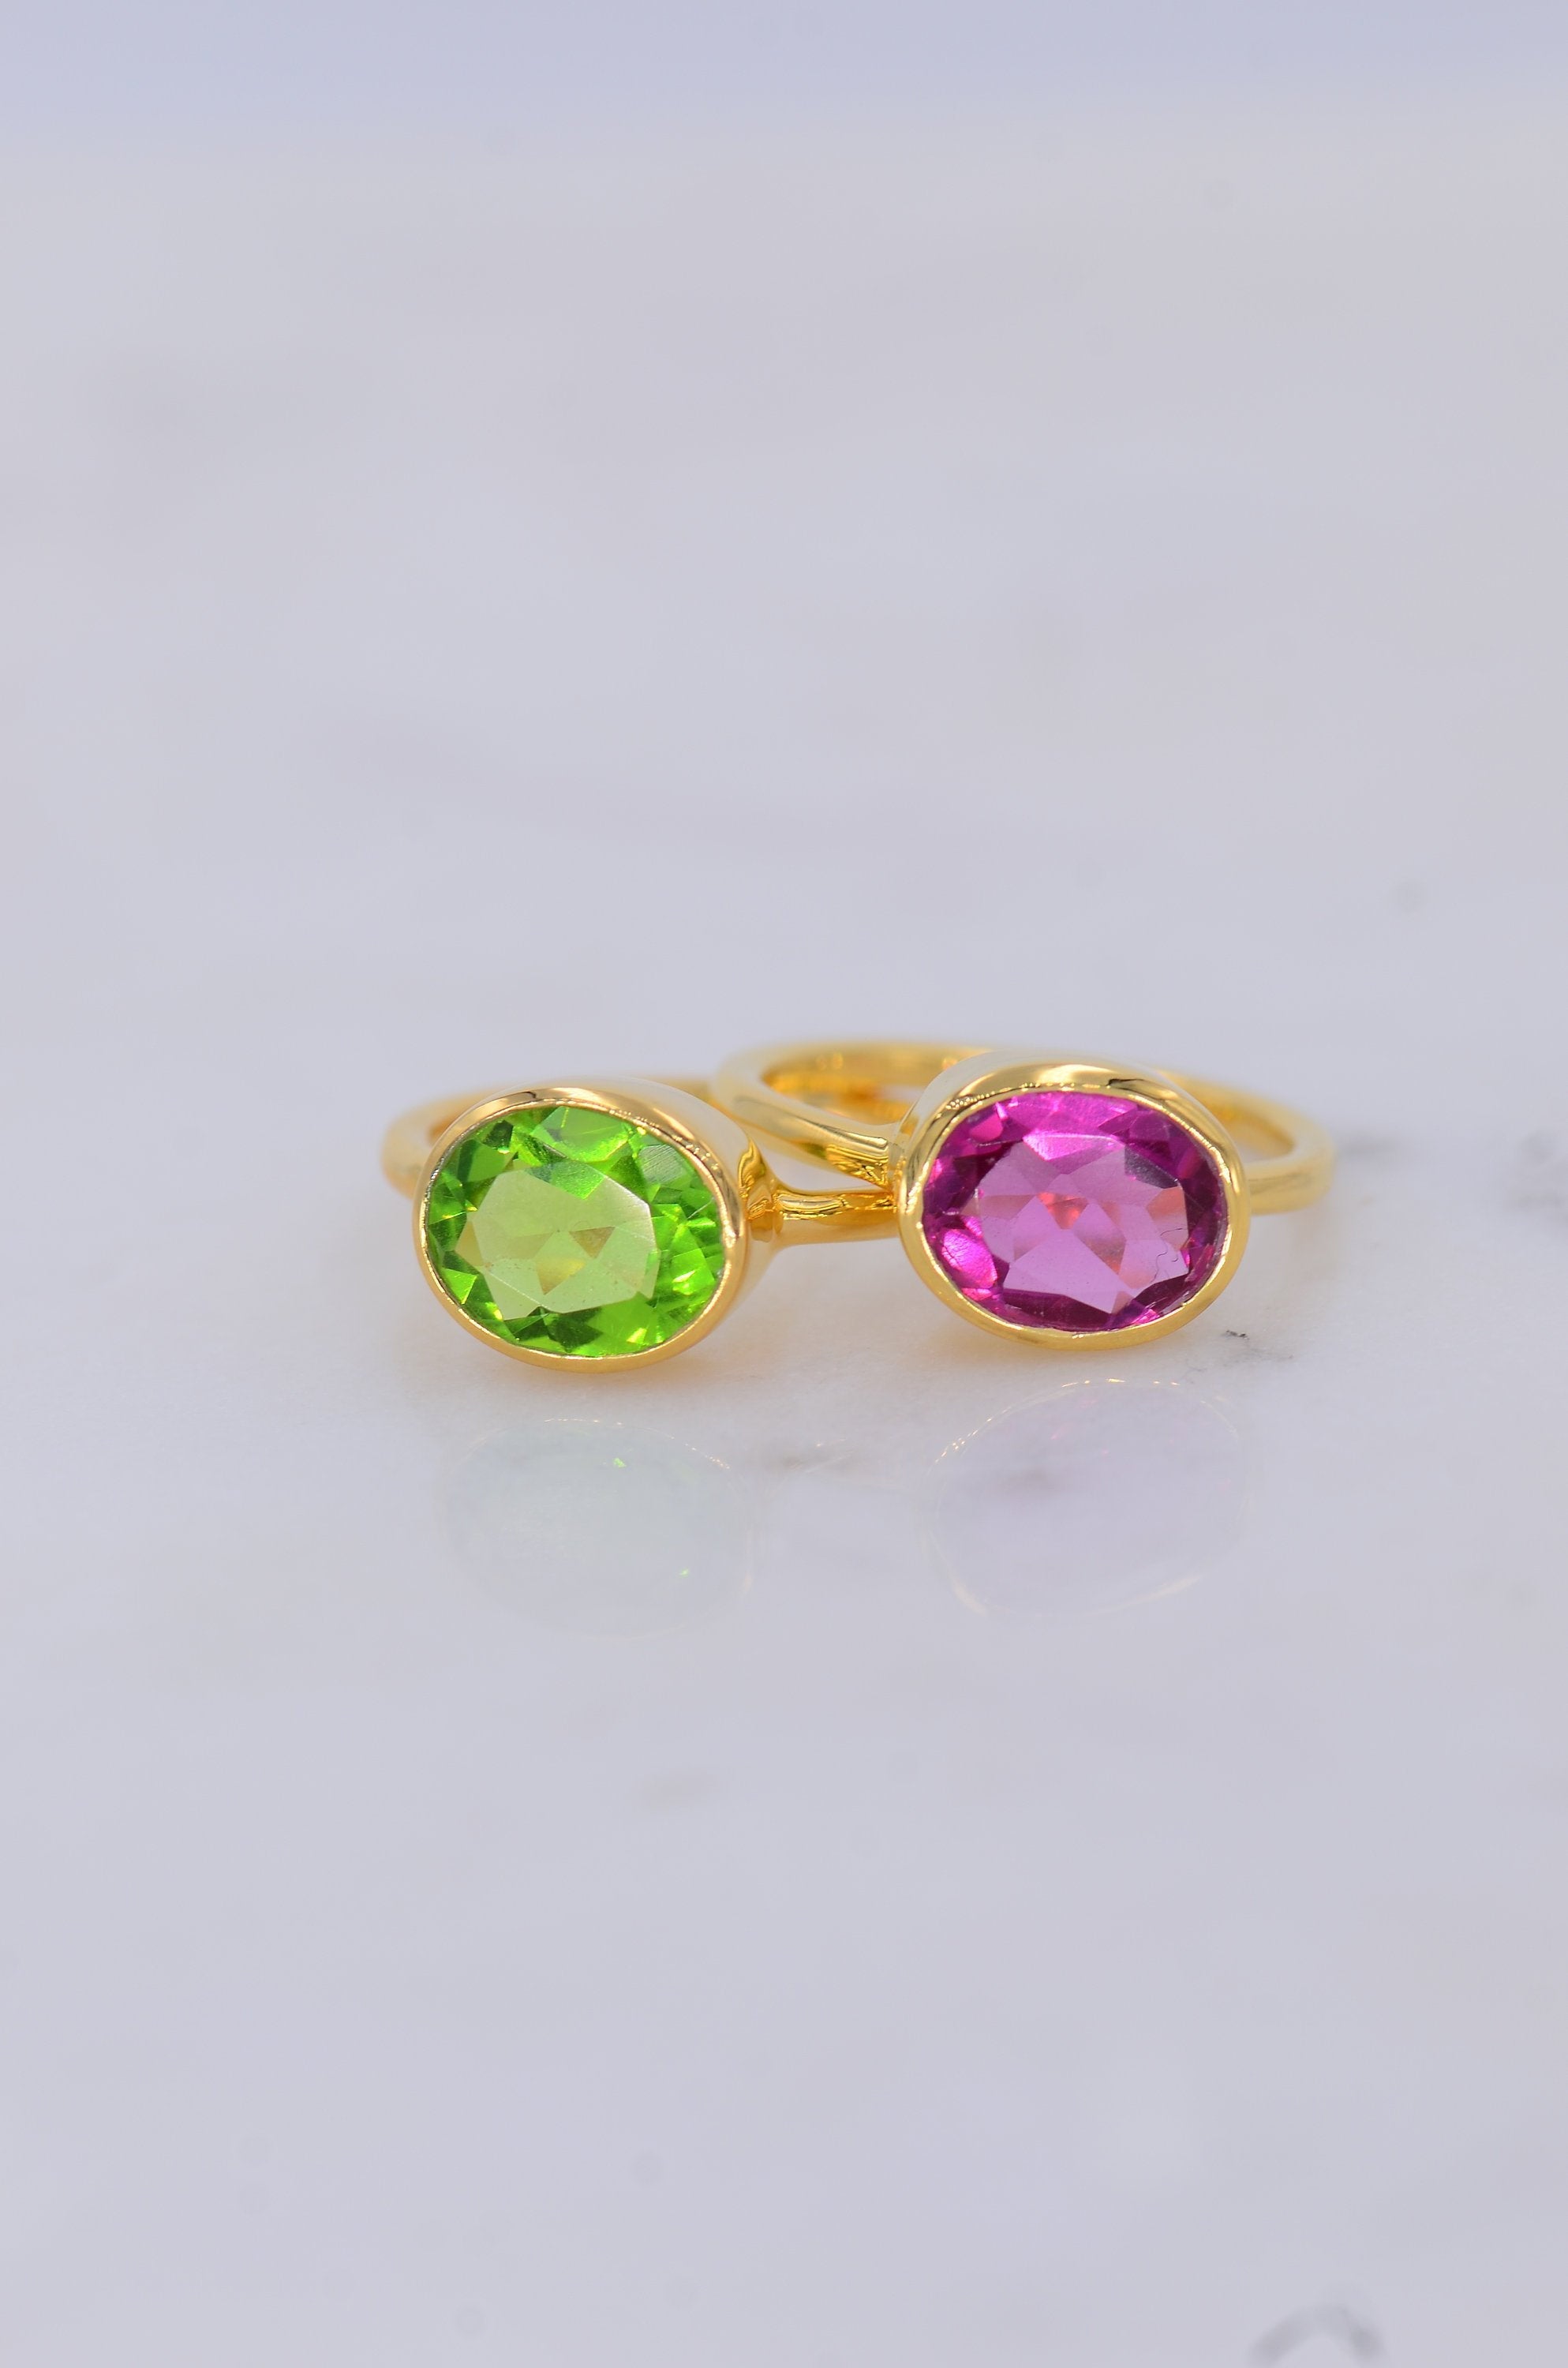 Valentine's gift for her, Duo Gemstone Ring, Birthstone ring, August Birthstone ring, Peridot ring, Pink Fuchsia ring, Gems stackable ring